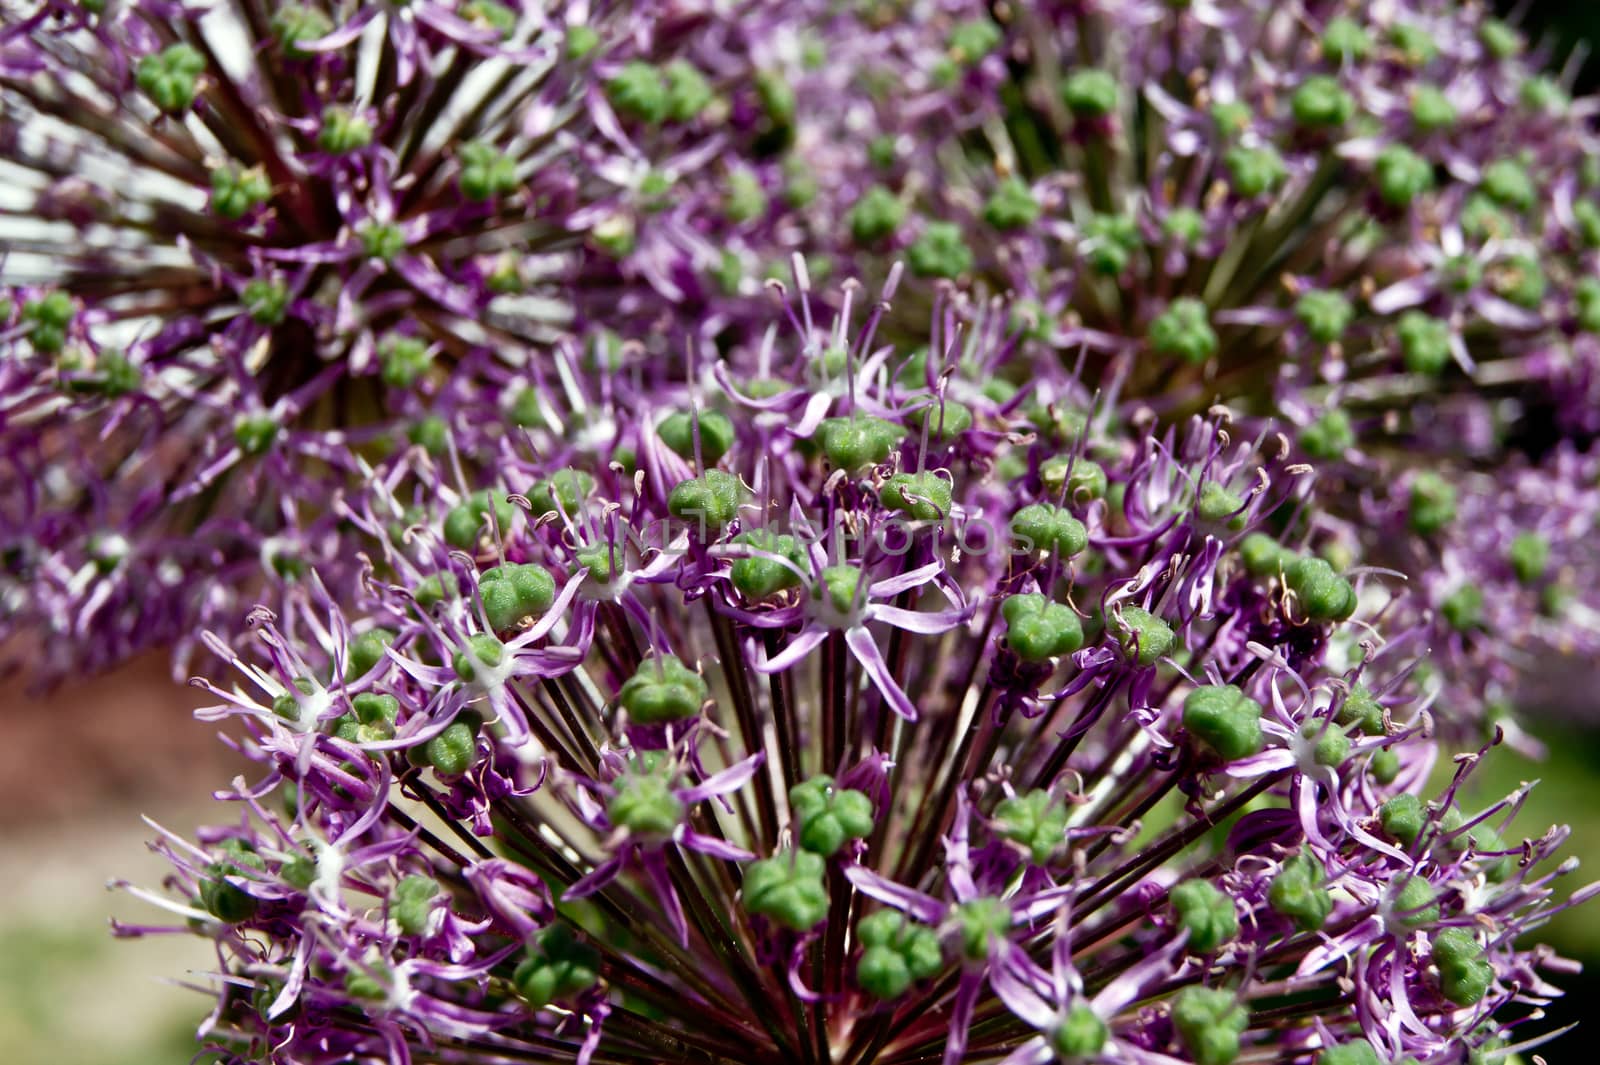 The ornamental onions in the spring flower garden ornament.